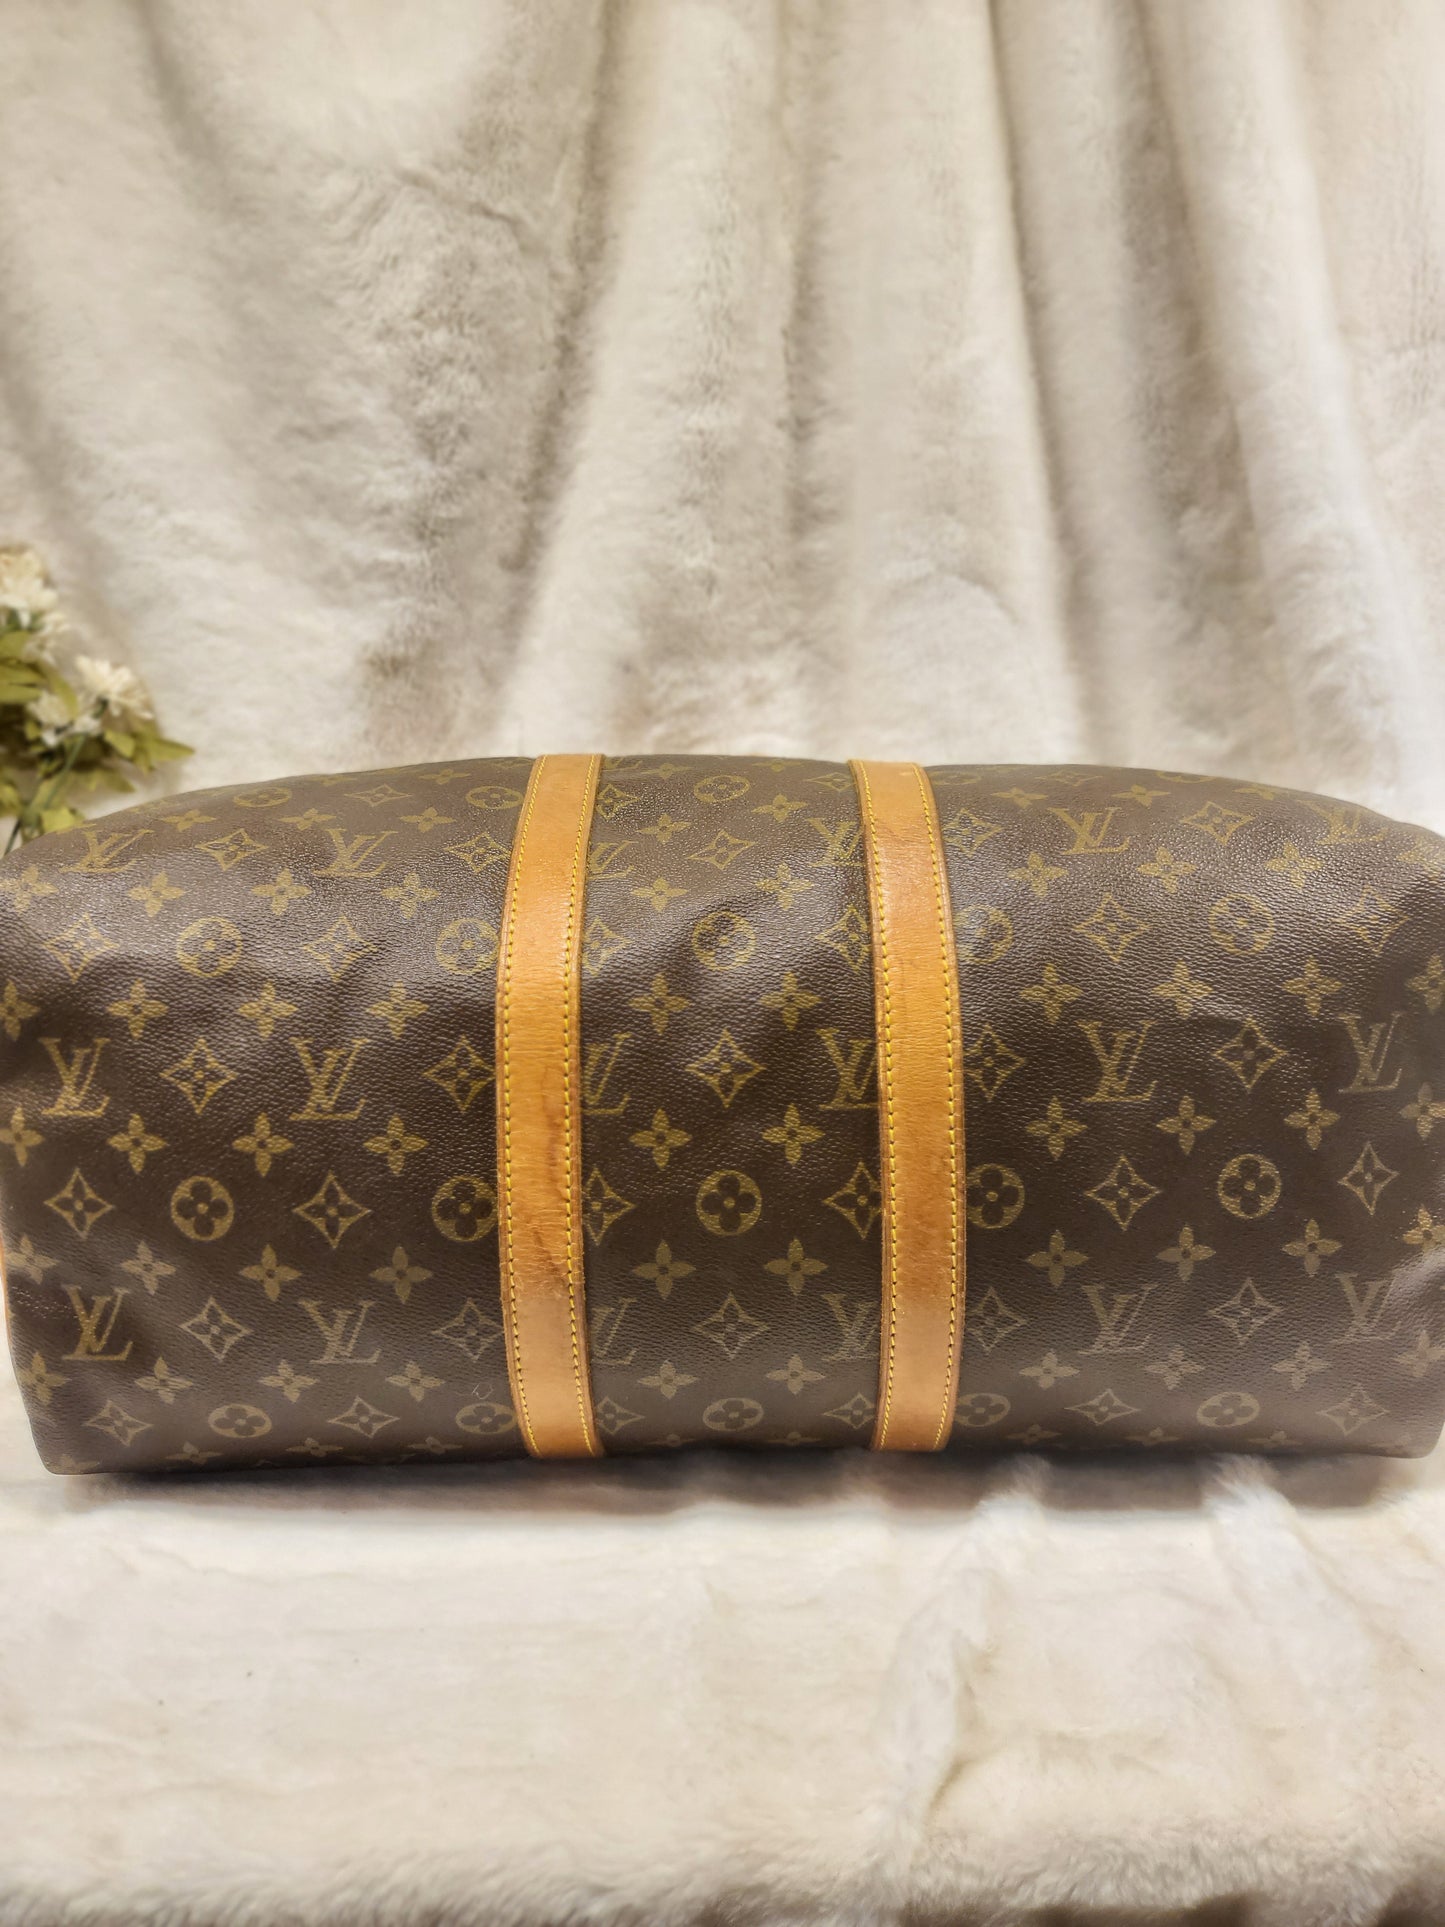 Authentic pre-owned Louis Vuitton Keepall 45 bandoliere travel luggage bag